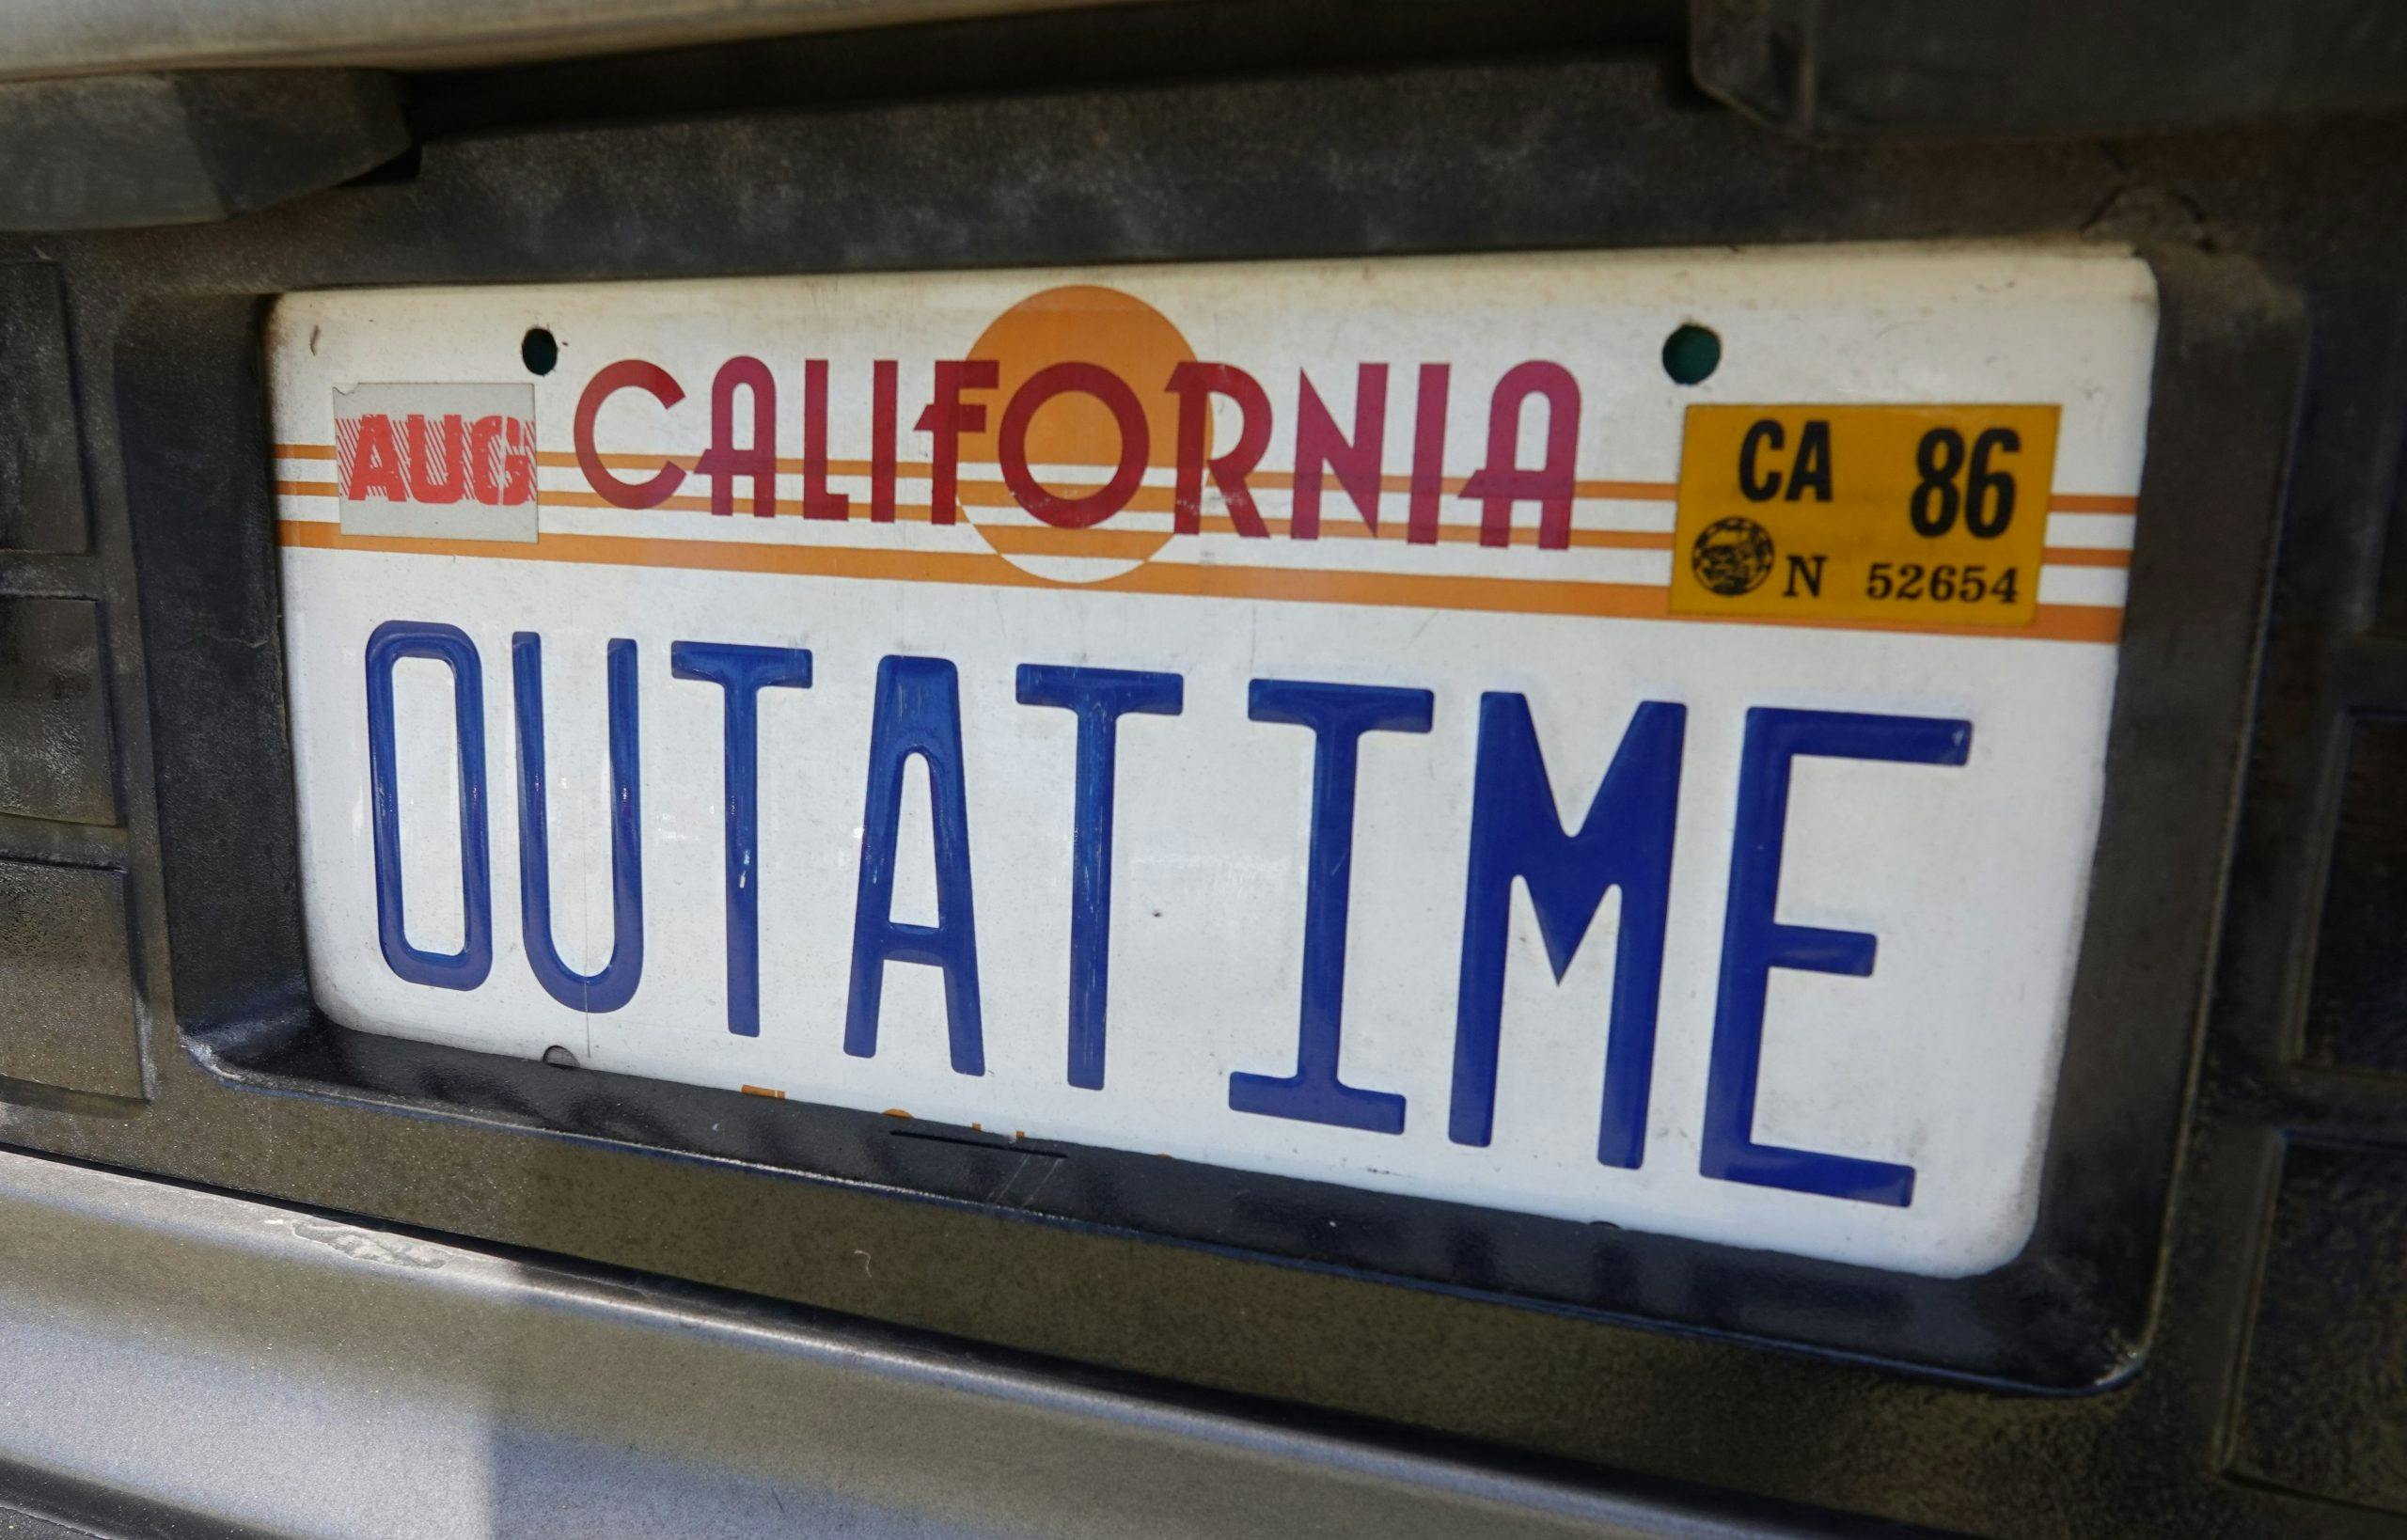 Time Machine - OUTATIME license plate